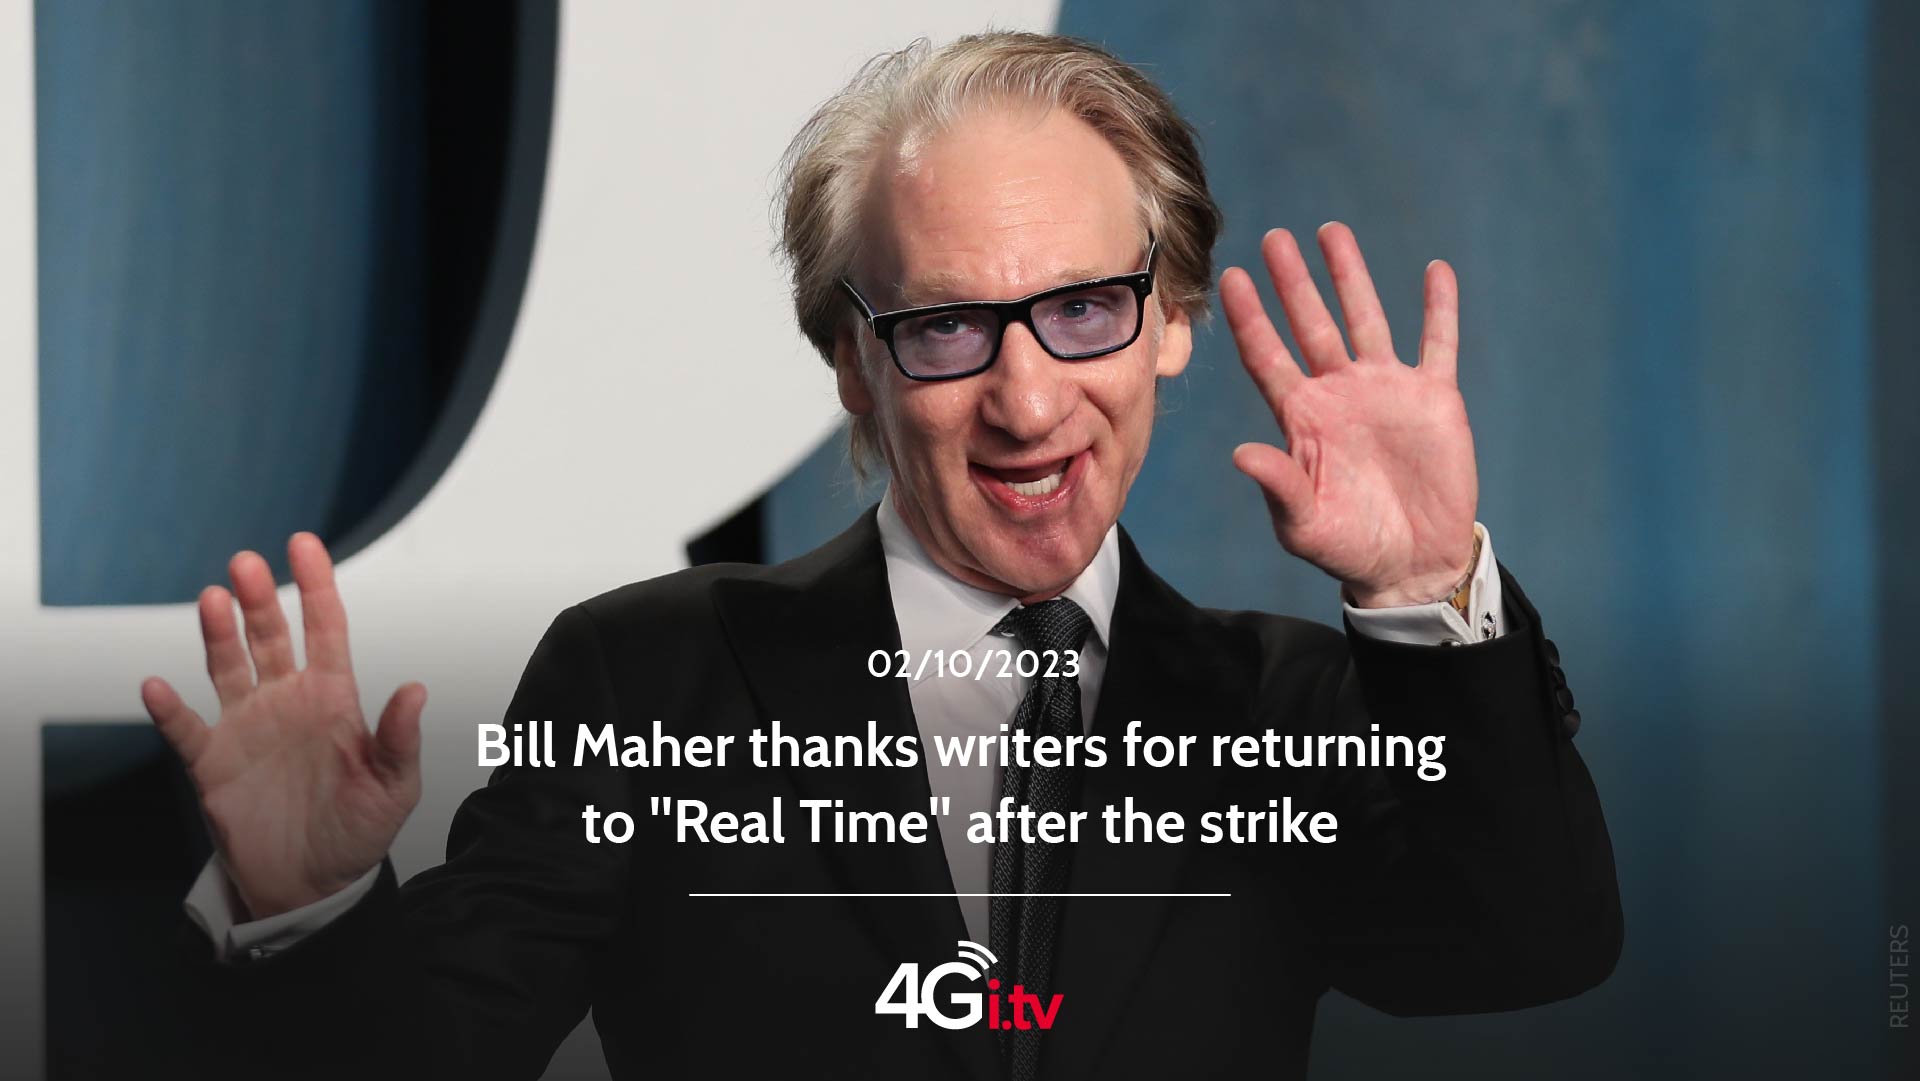 Lee más sobre el artículo Bill Maher thanks writers for returning to “Real Time” after the strike